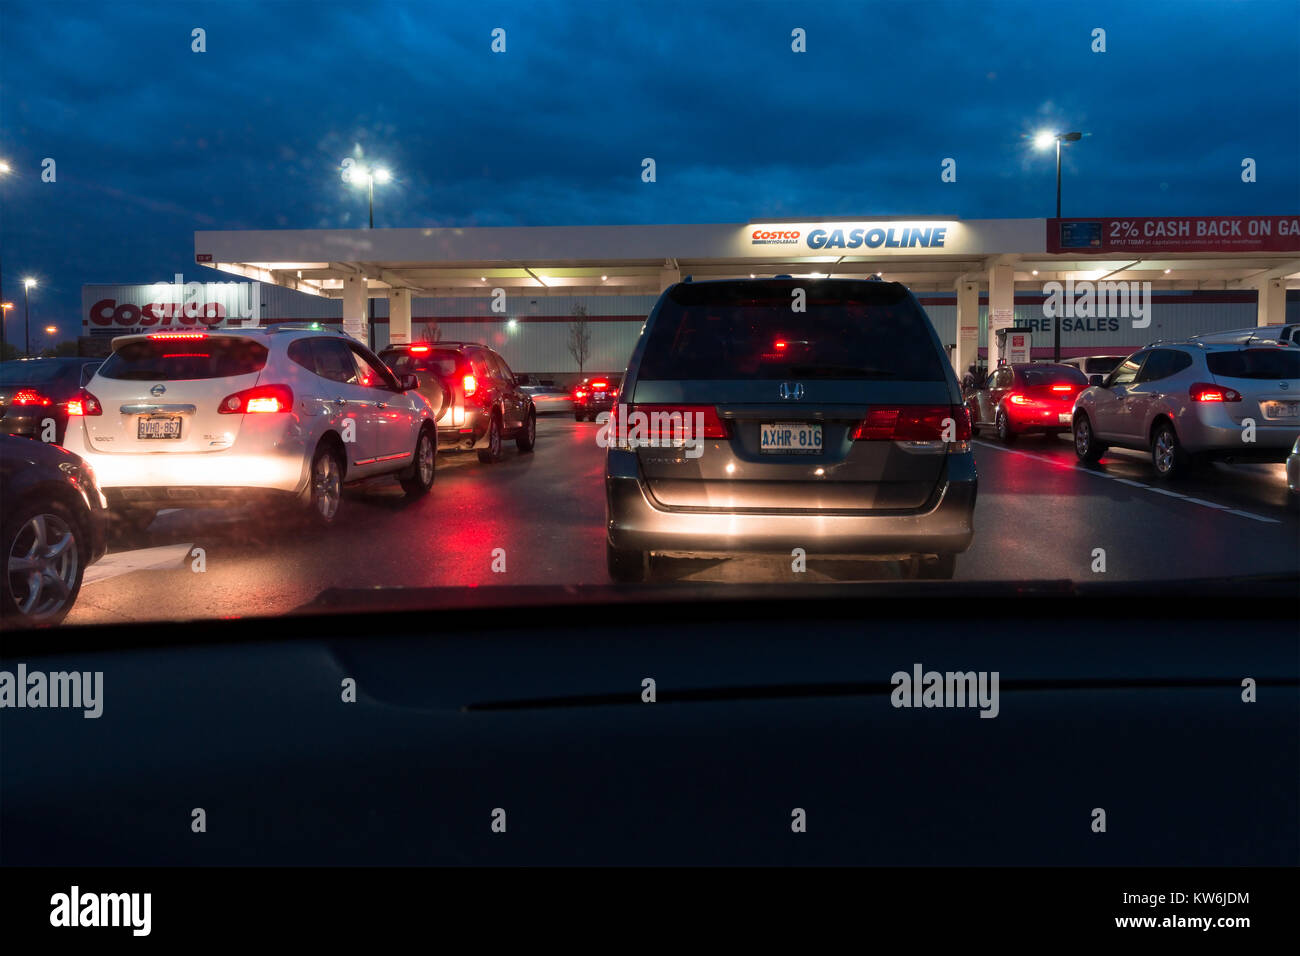 Vehicles lined up at a Costco Gasoline gas station in Canada. Stock Photo